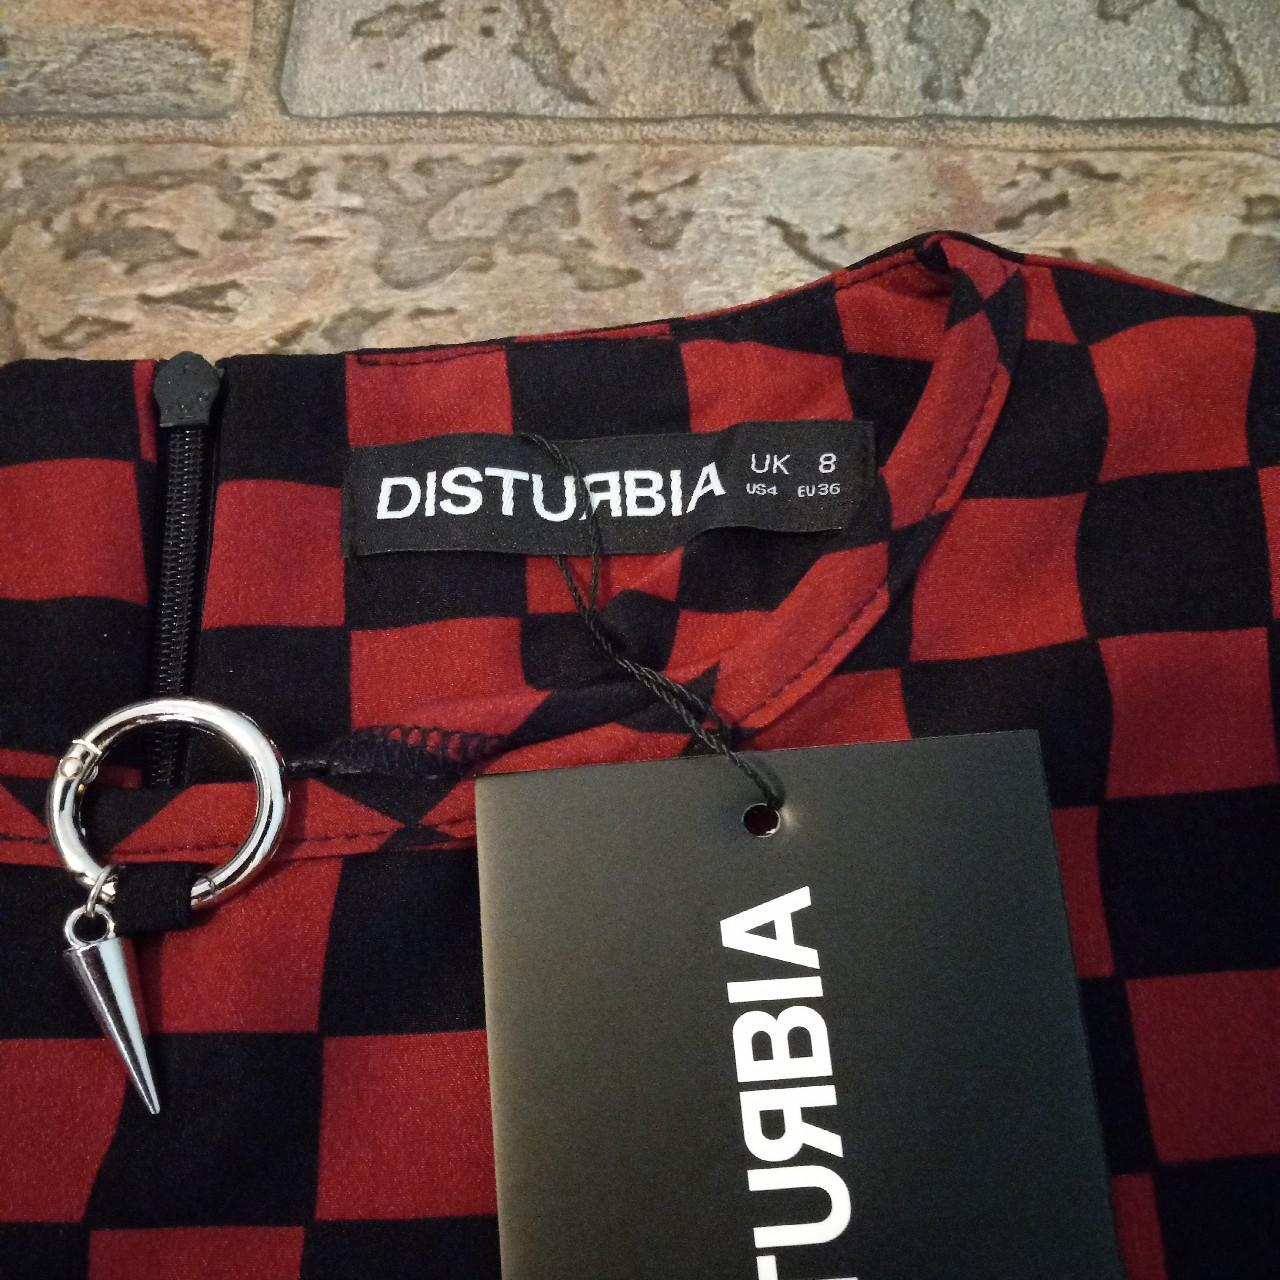 Product Image 3 - Sold in a bundle deal.

Disturbia